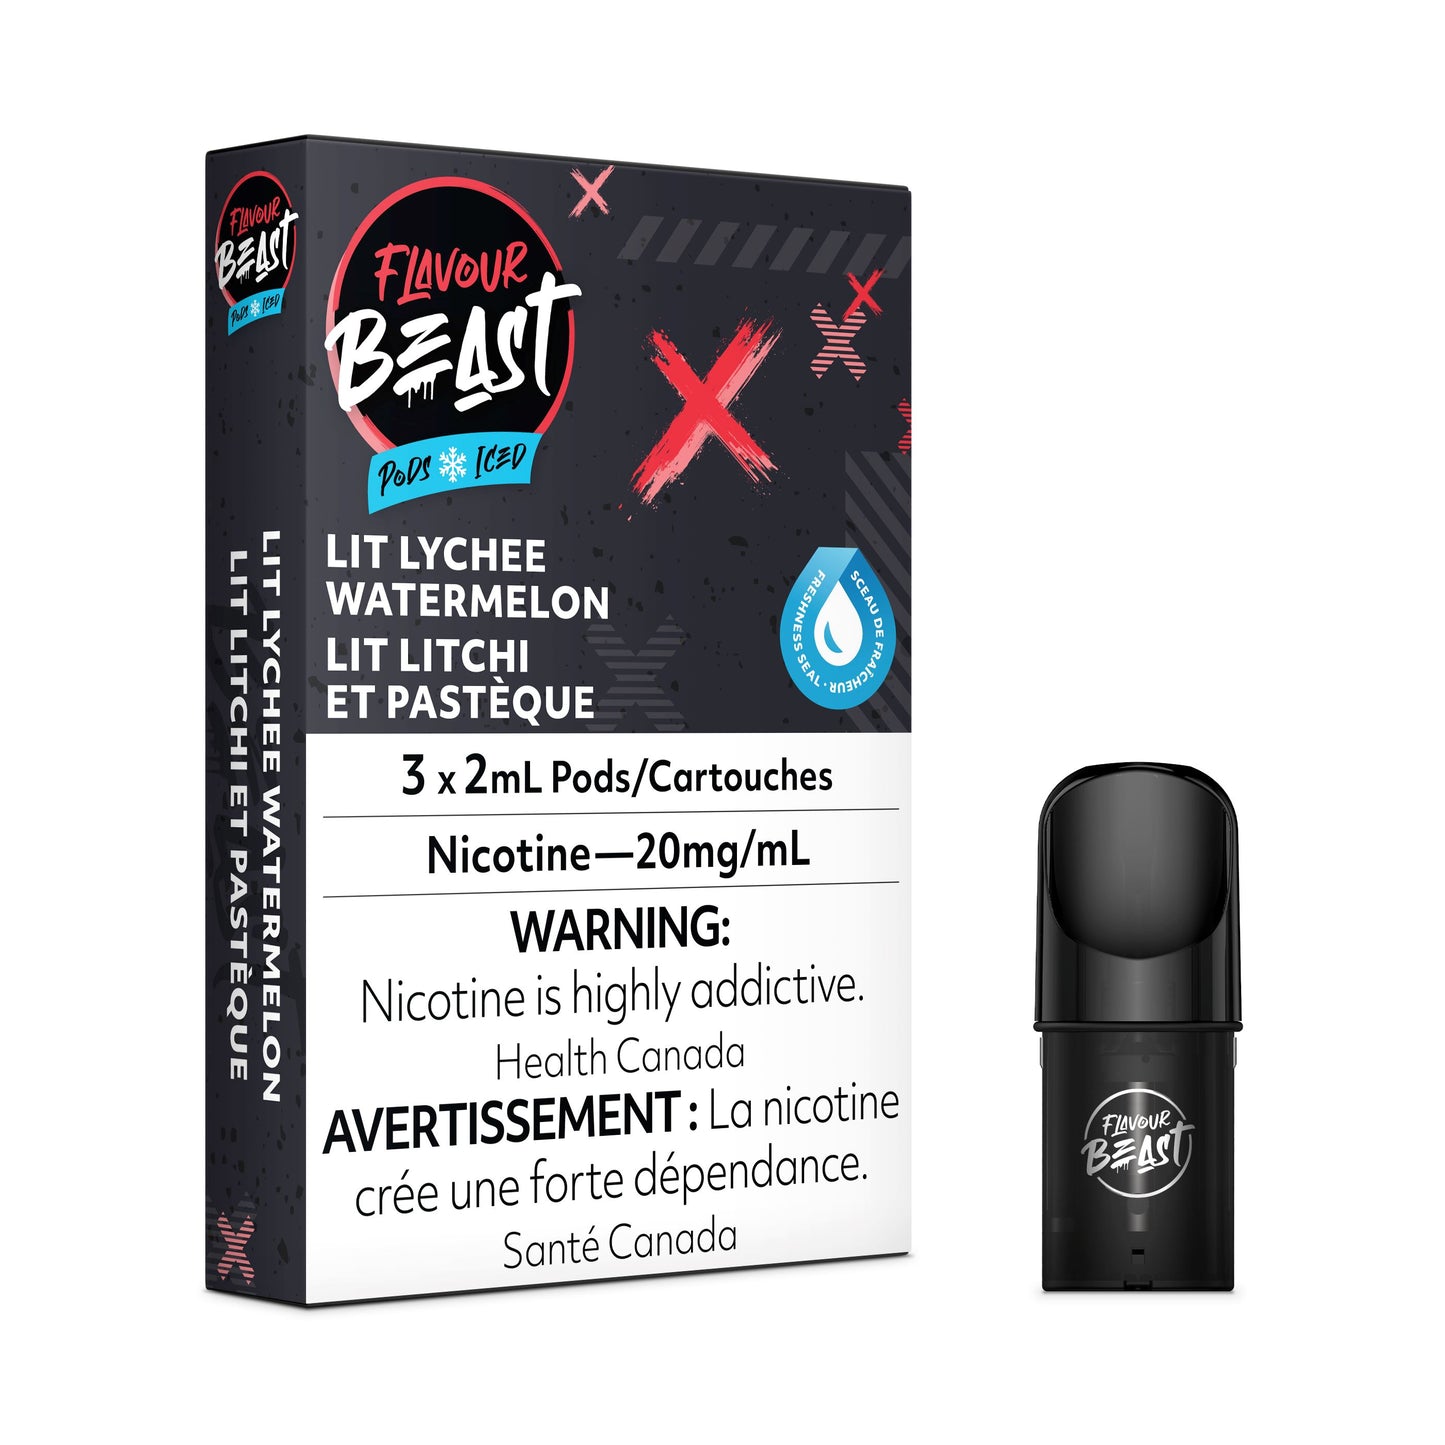 Lit Lychee Watermelon Iced - FB CLOSED PODS Flavour Beast Flow 